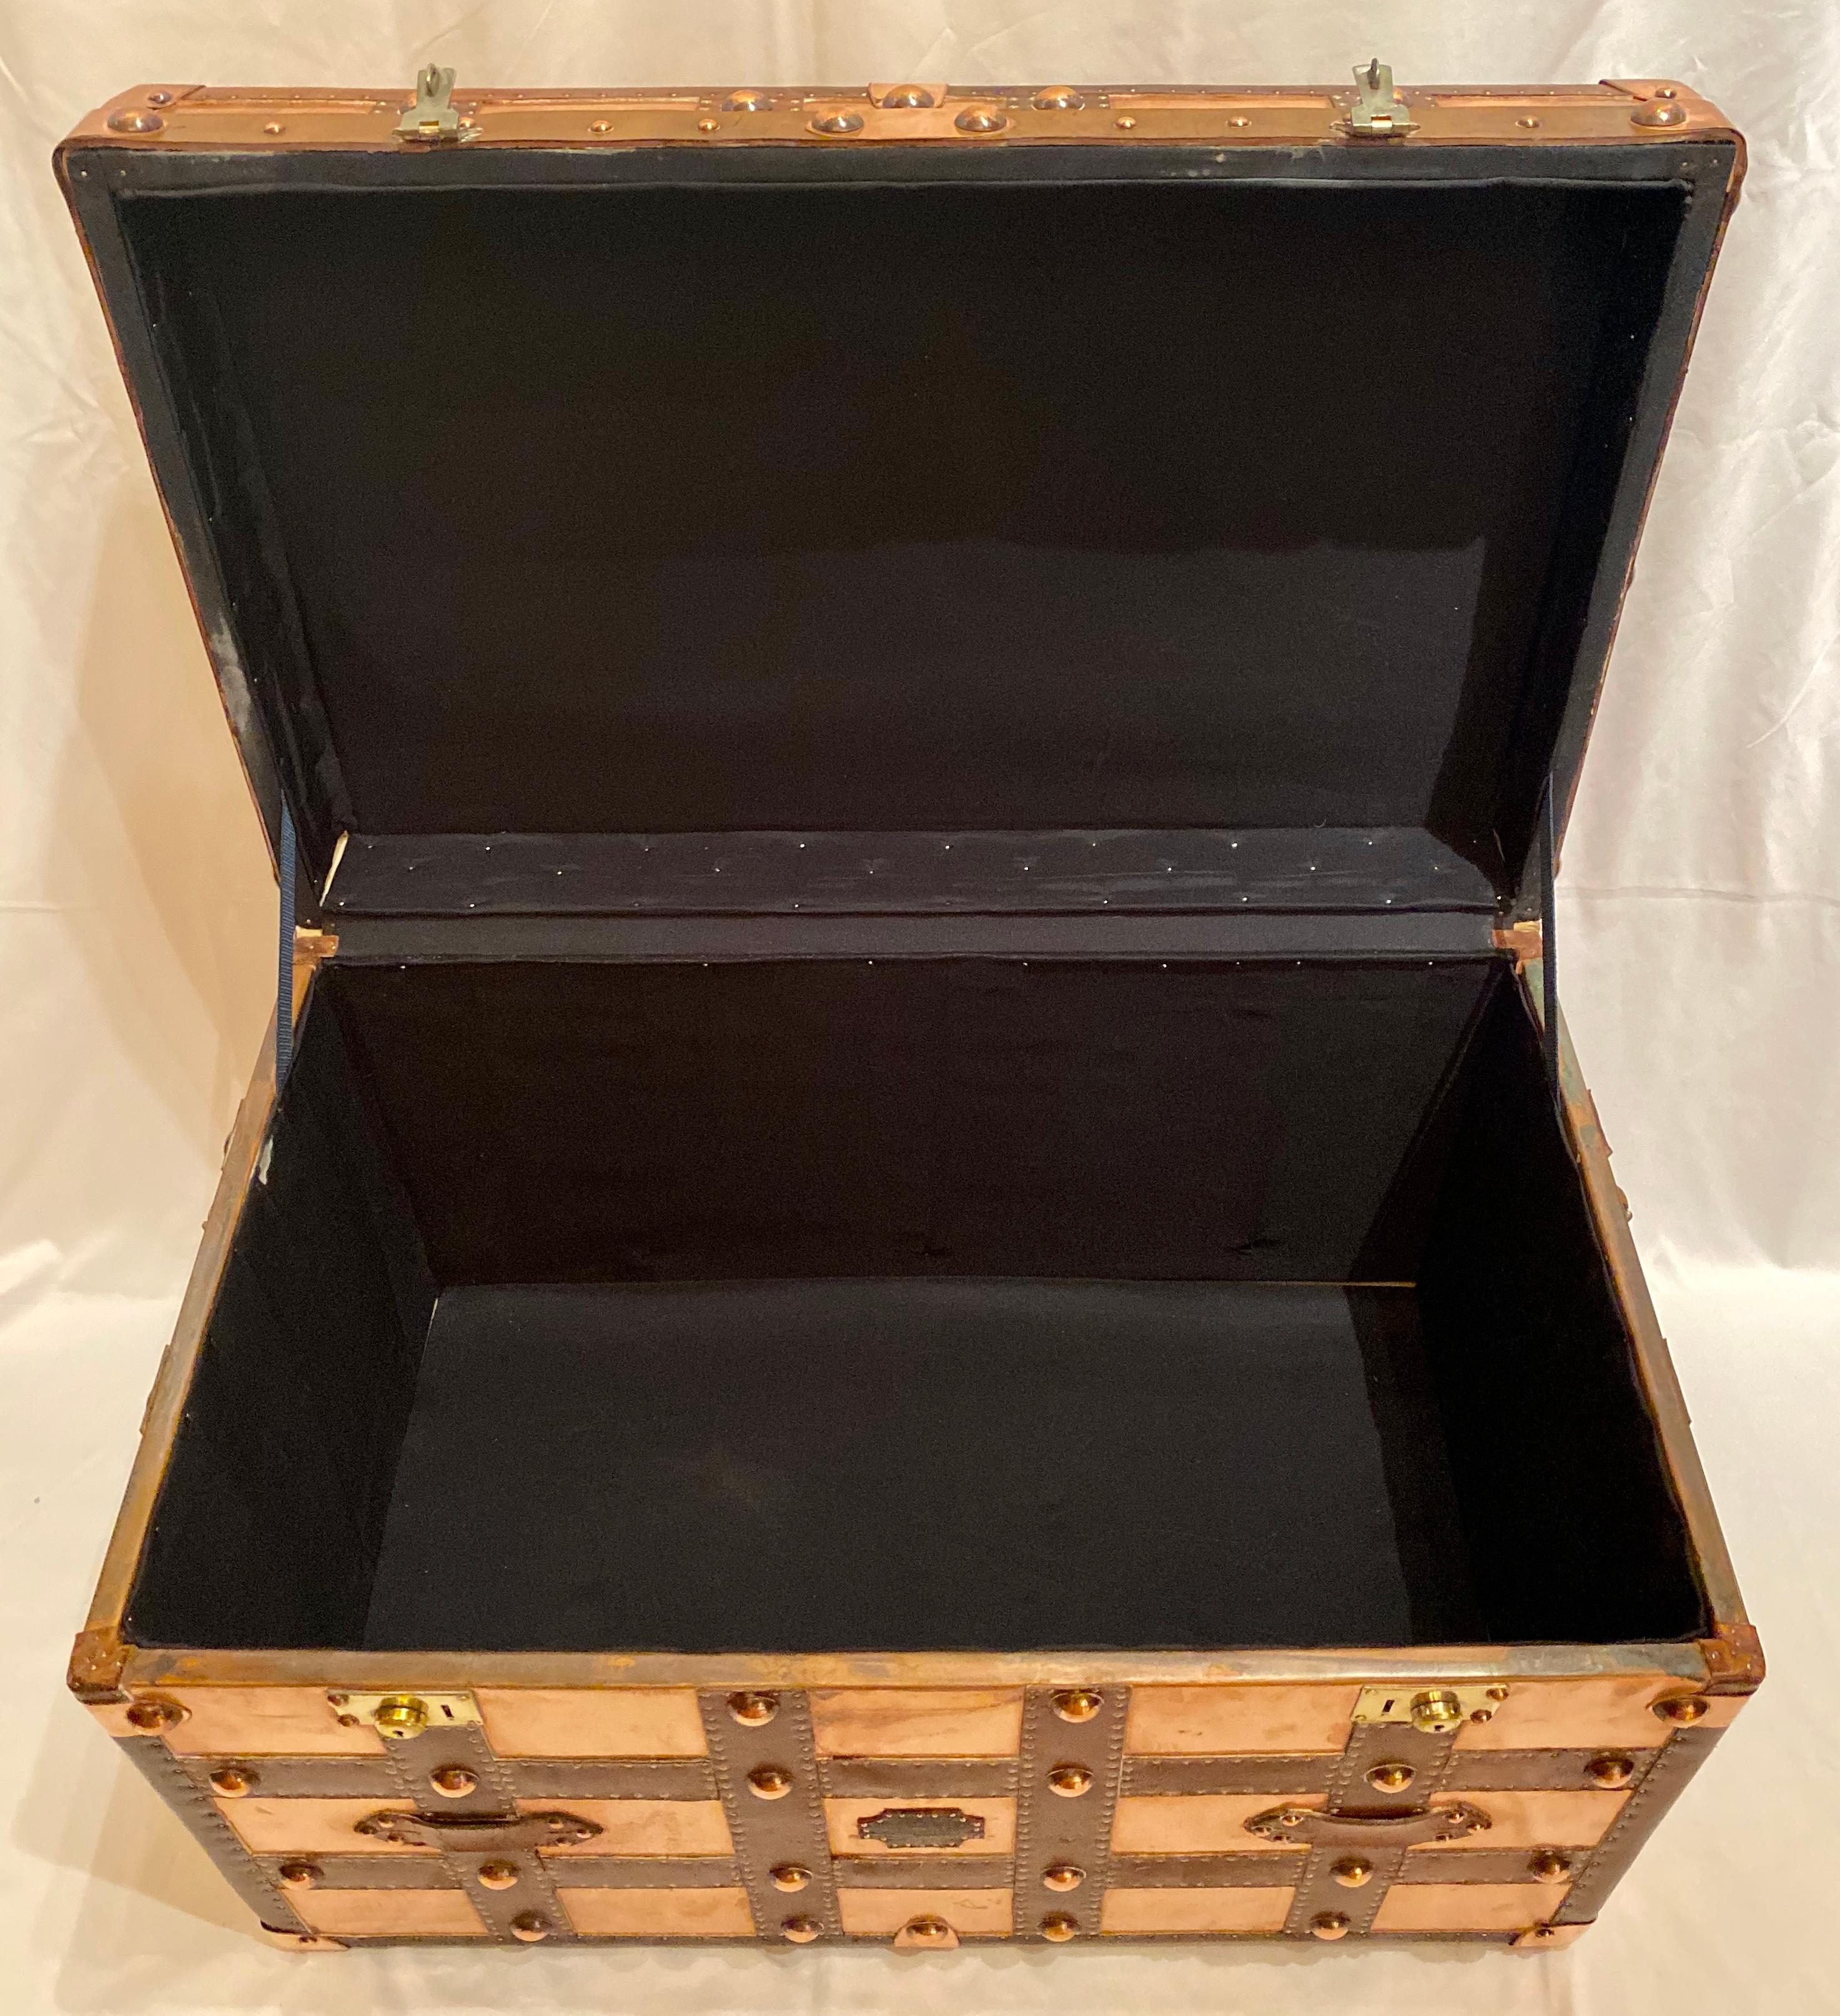 English Antique British Military Officer's Trunk, Copper and Leather, circa 1890